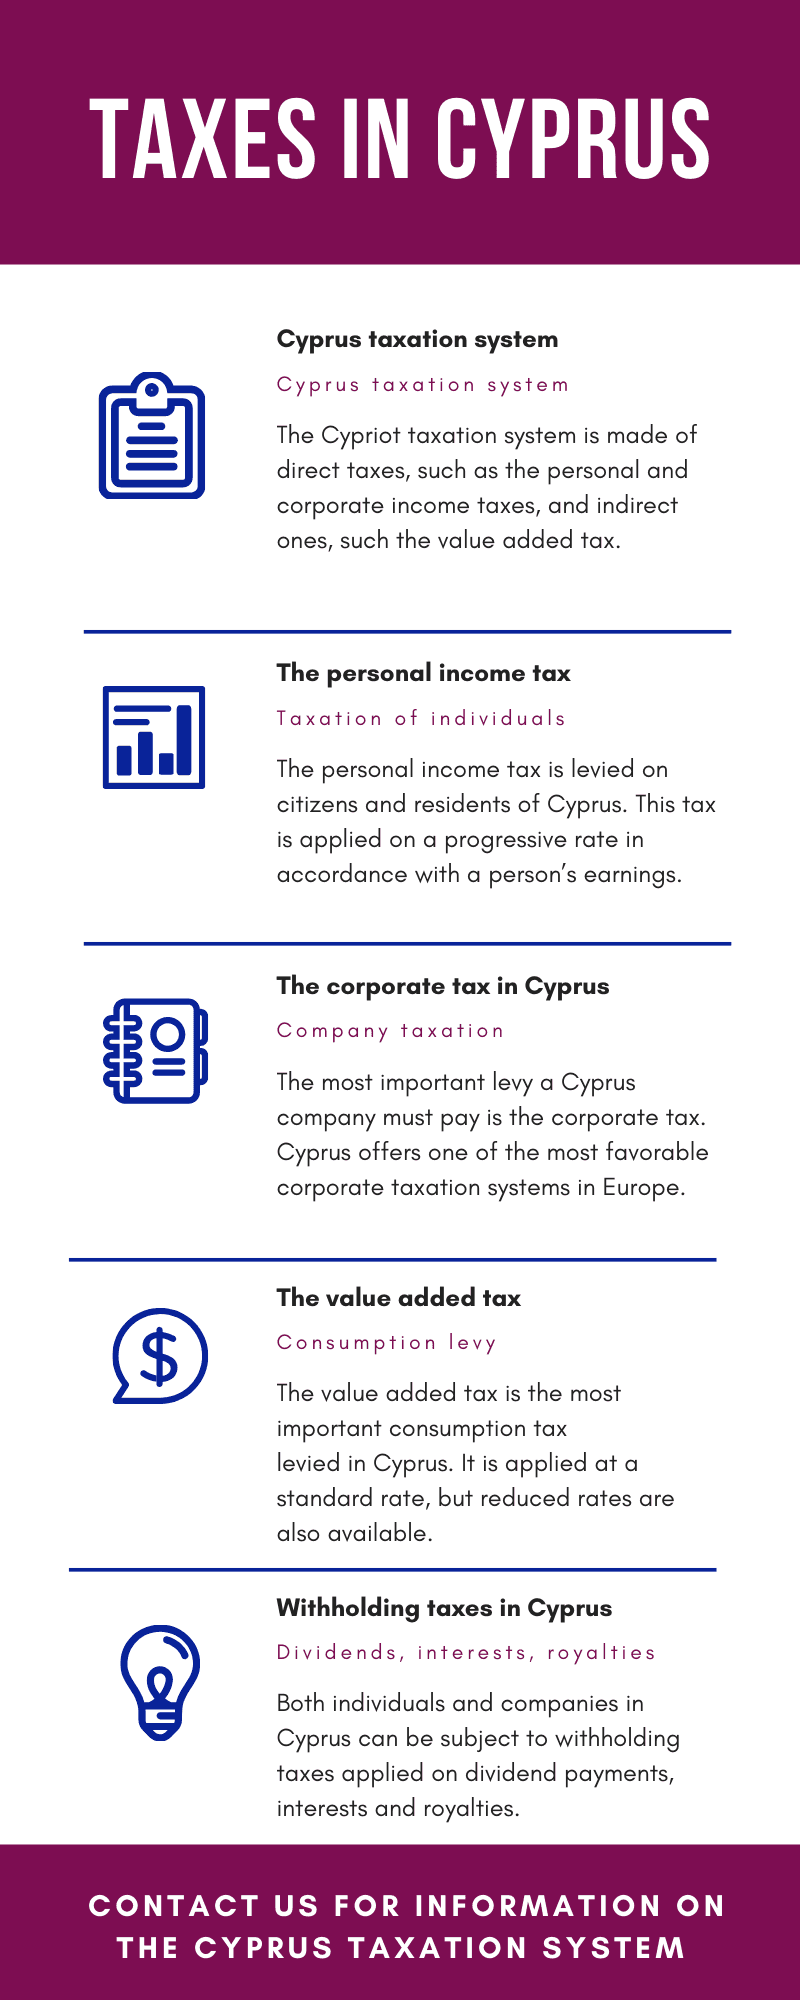 Taxes in Cyprus